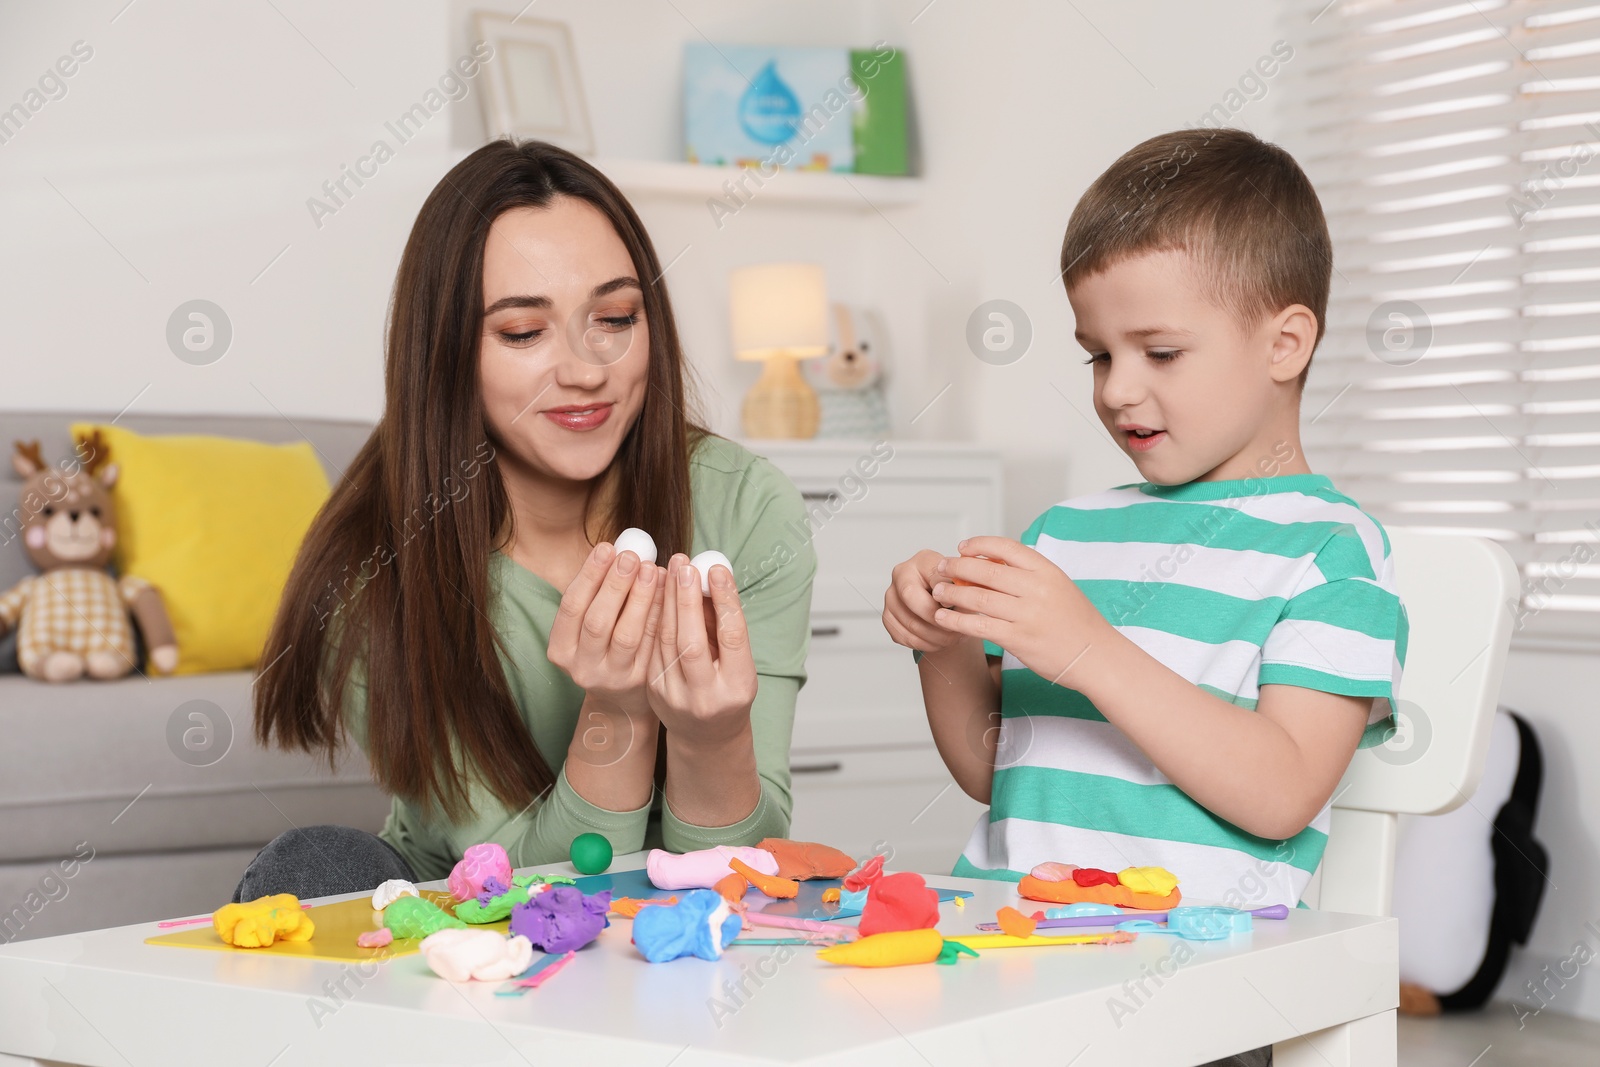 Photo of Son and mother sculpting with play dough at table indoors